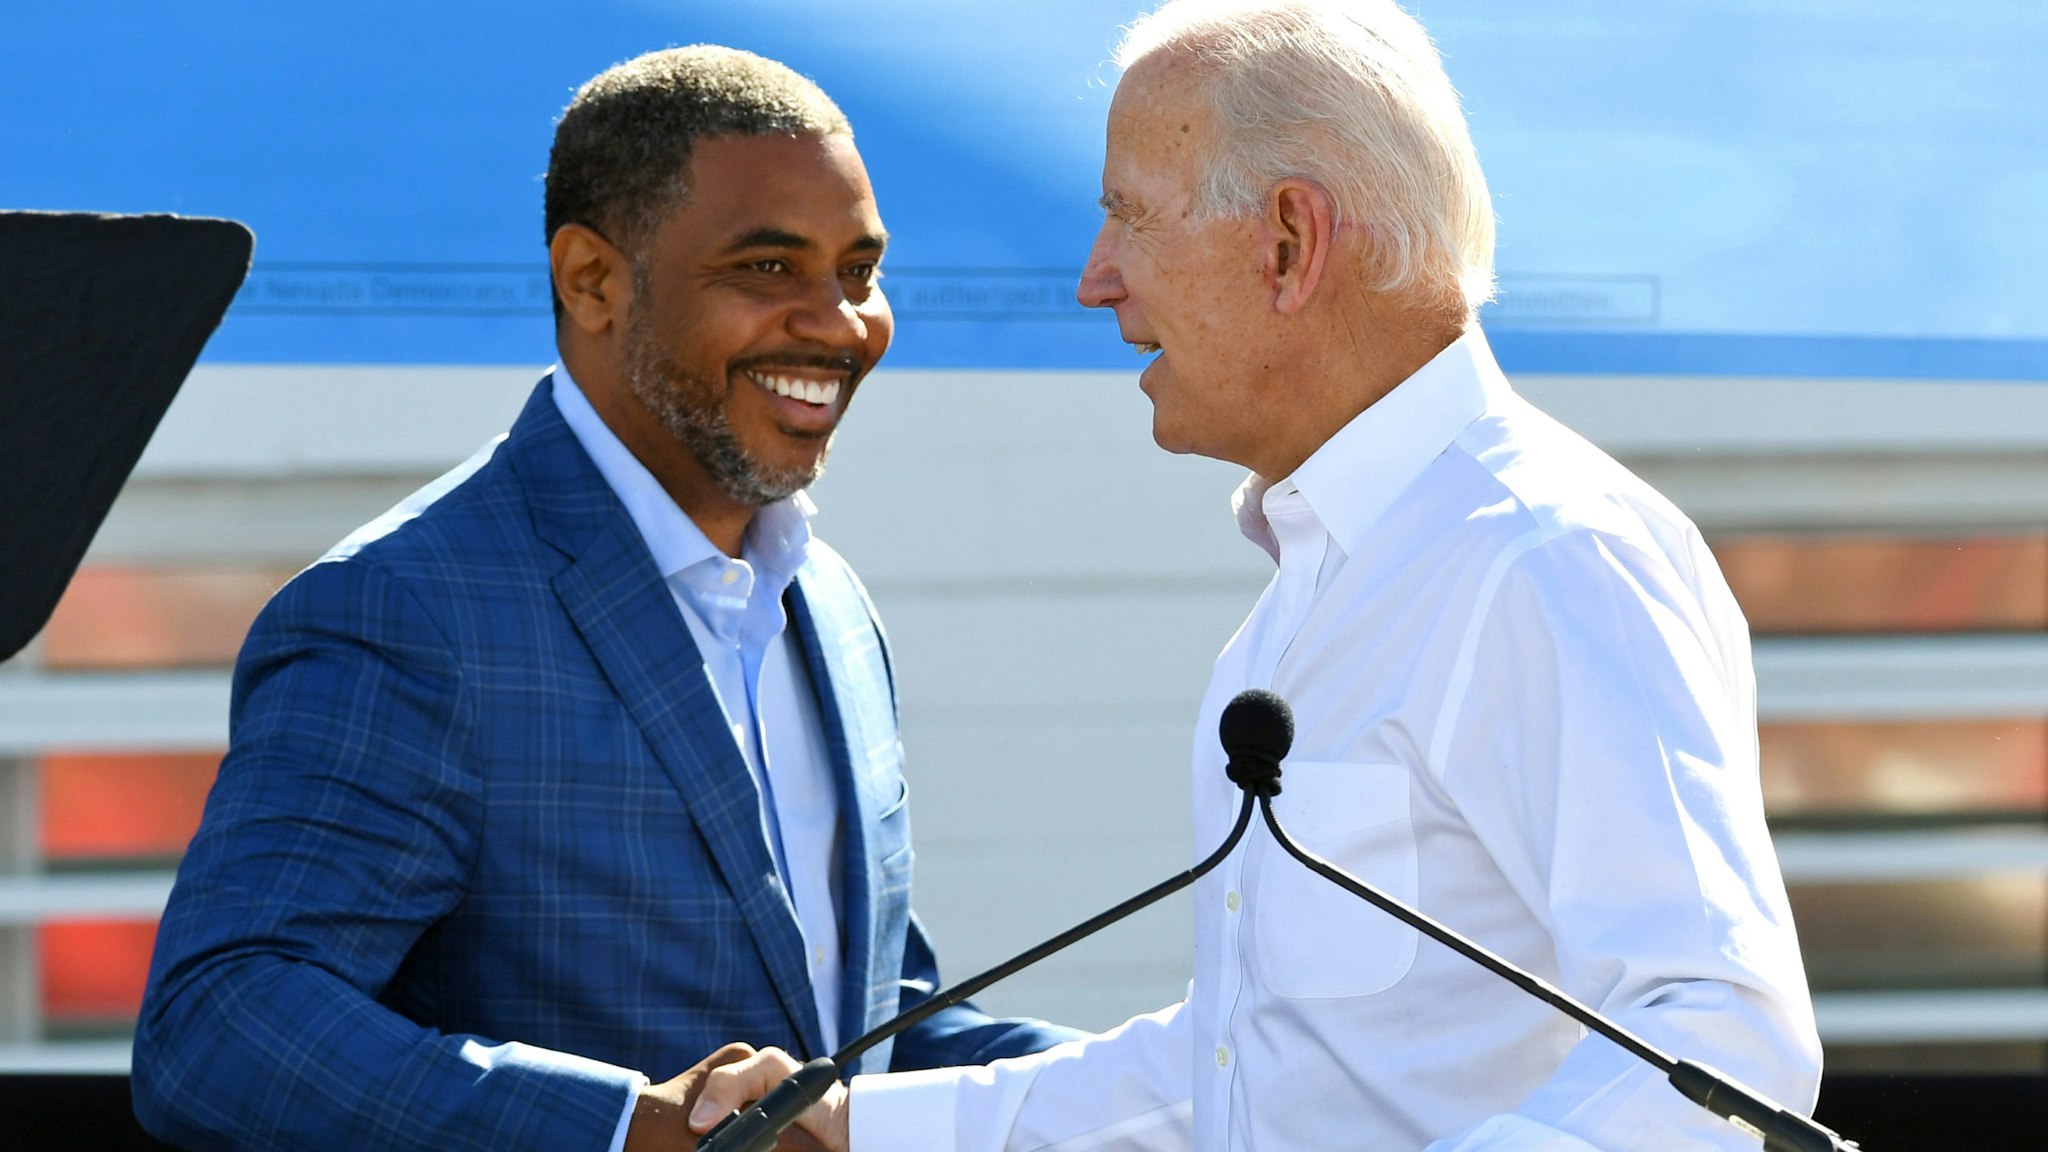 LAS VEGAS, NEVADA - OCTOBER 20: Democratic candidate for Nevada's 4th House District Steven Horsford (L) is greeted by former U.S. Vice President Joe Biden during a rally at the Culinary Workers Union Hall Local 226 as Biden campaigns for Nevada Democratic candidates on October 20, 2018 in Las Vegas, Nevada. Early voting for the midterm elections in Nevada begins today.